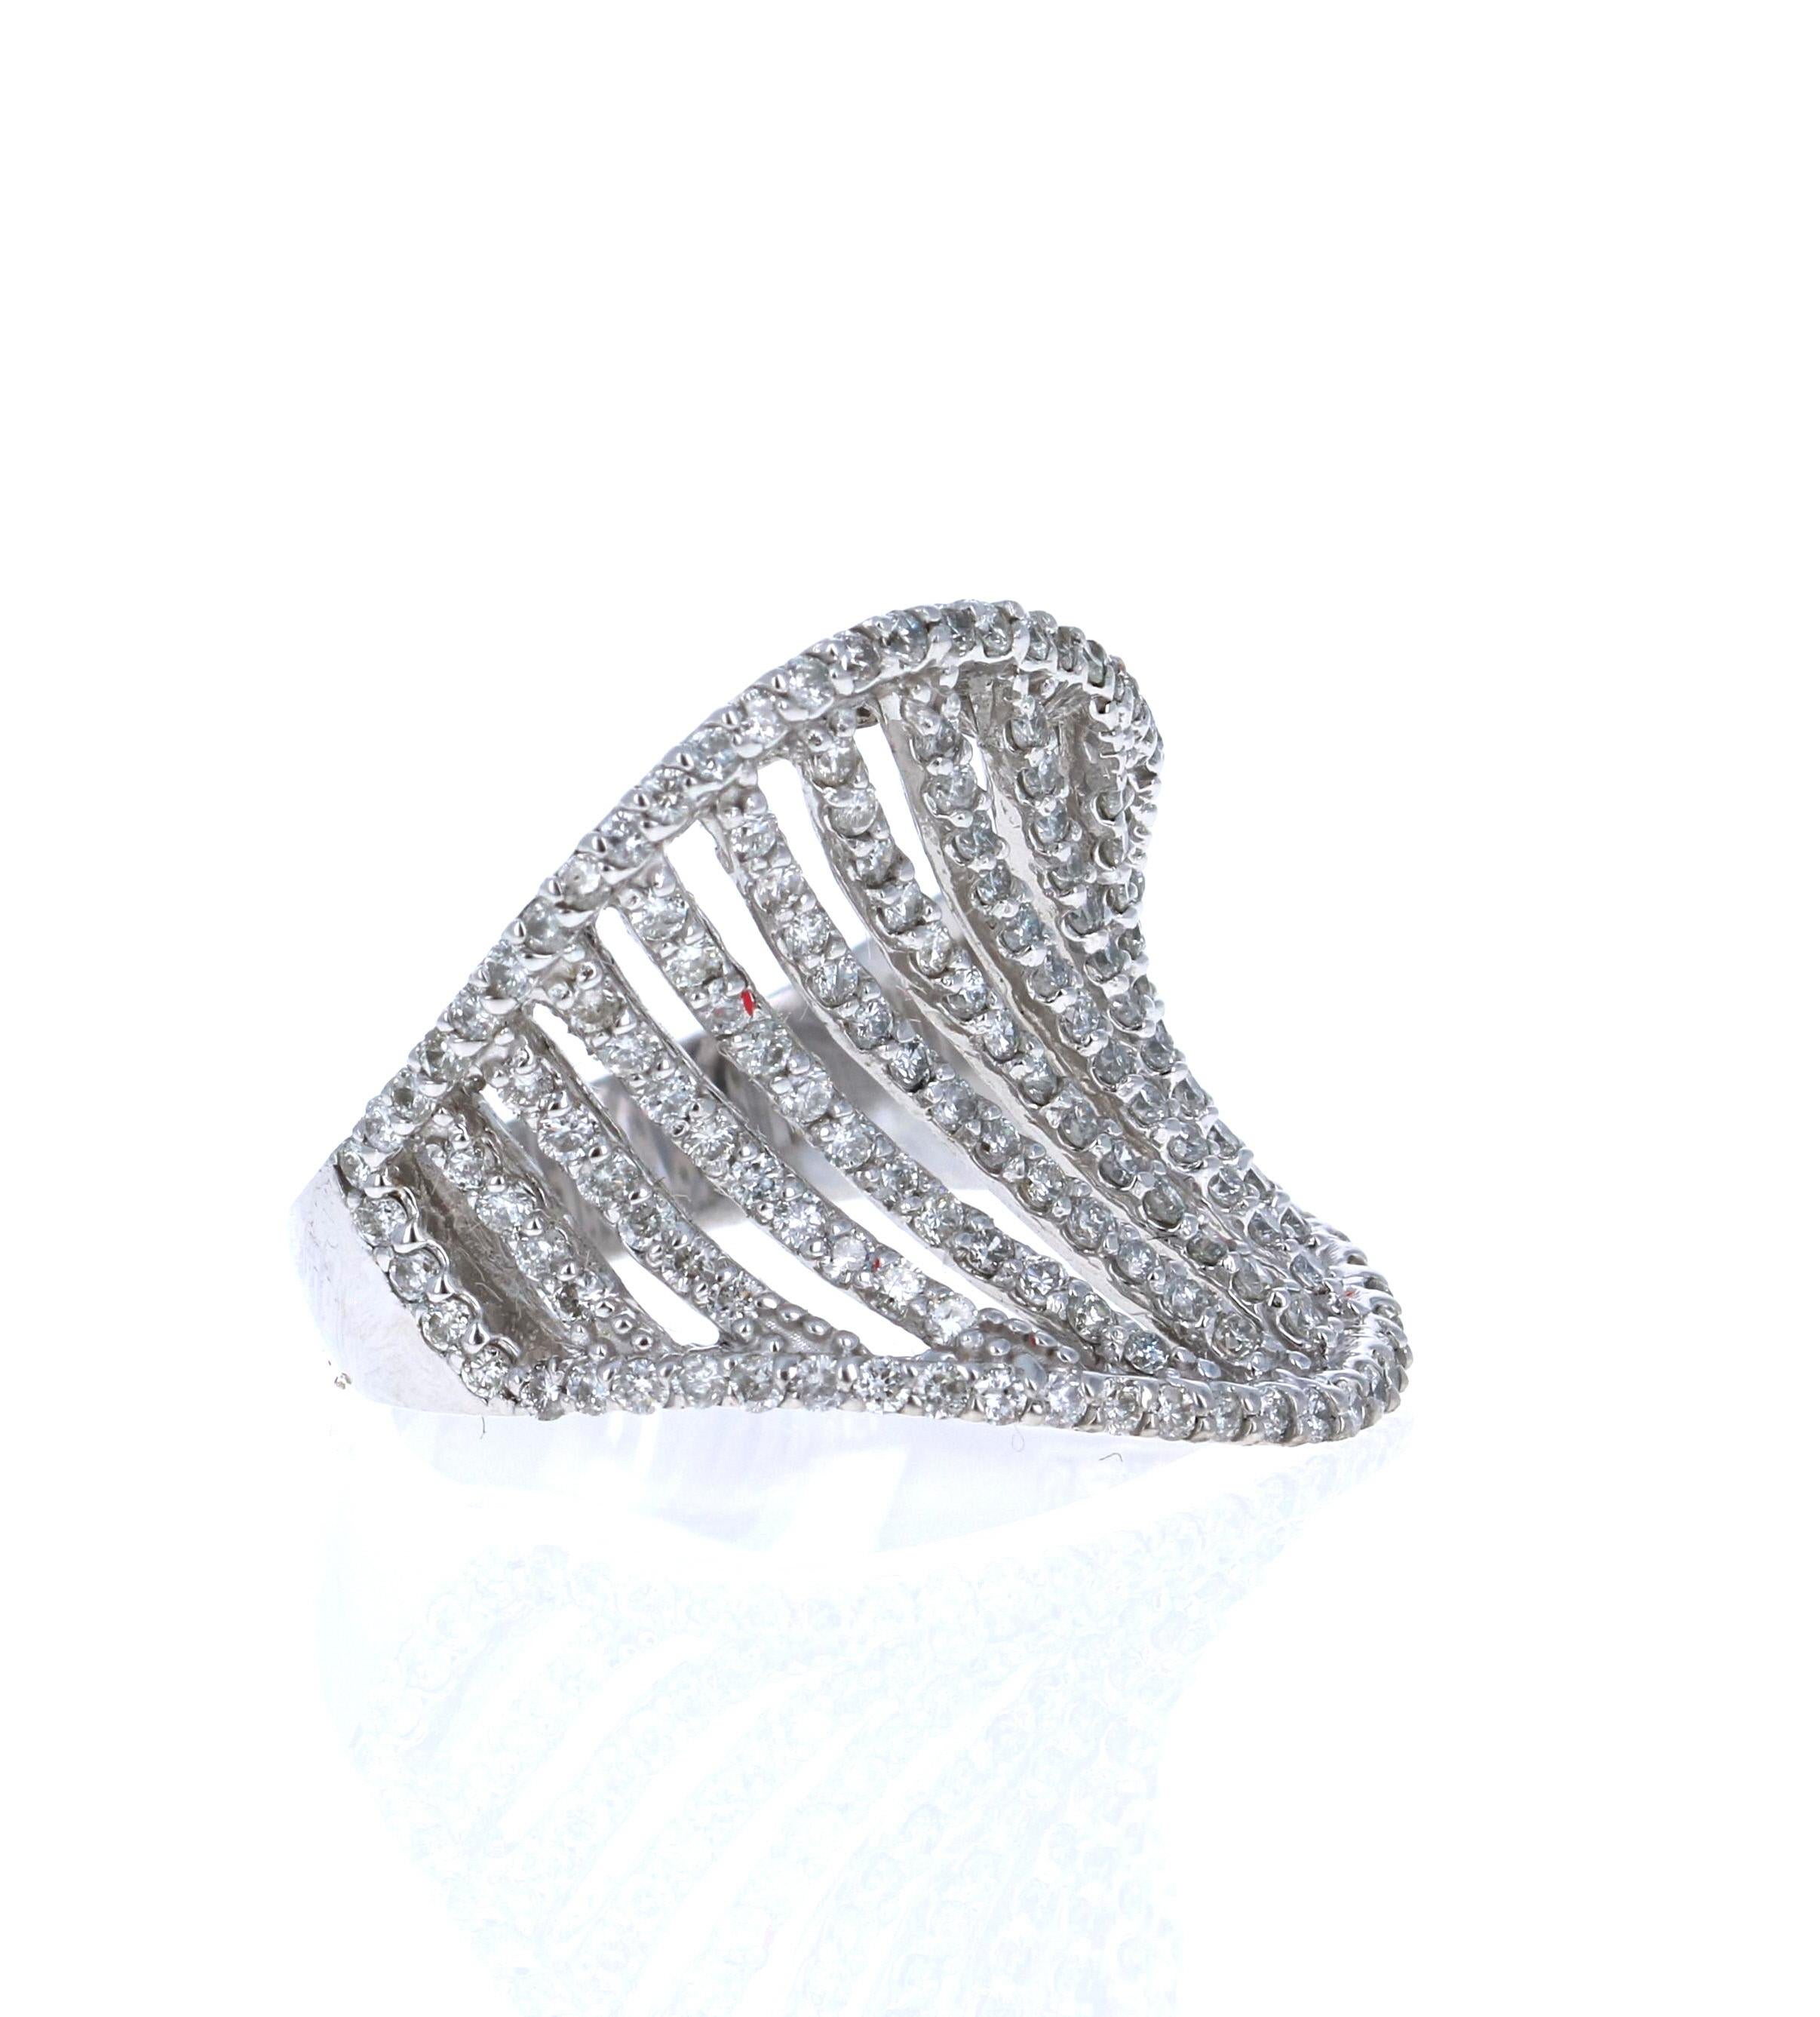 This ring has 170 Round Cut Diamonds that weigh 1.33 Carats and has a clarity and color of SI-F.  
It is crafted in 14 Karat White Gold and has an approximate weight of 7.4 grams. 

The ring is a size 7 and can be re-sized at no additional charge! 